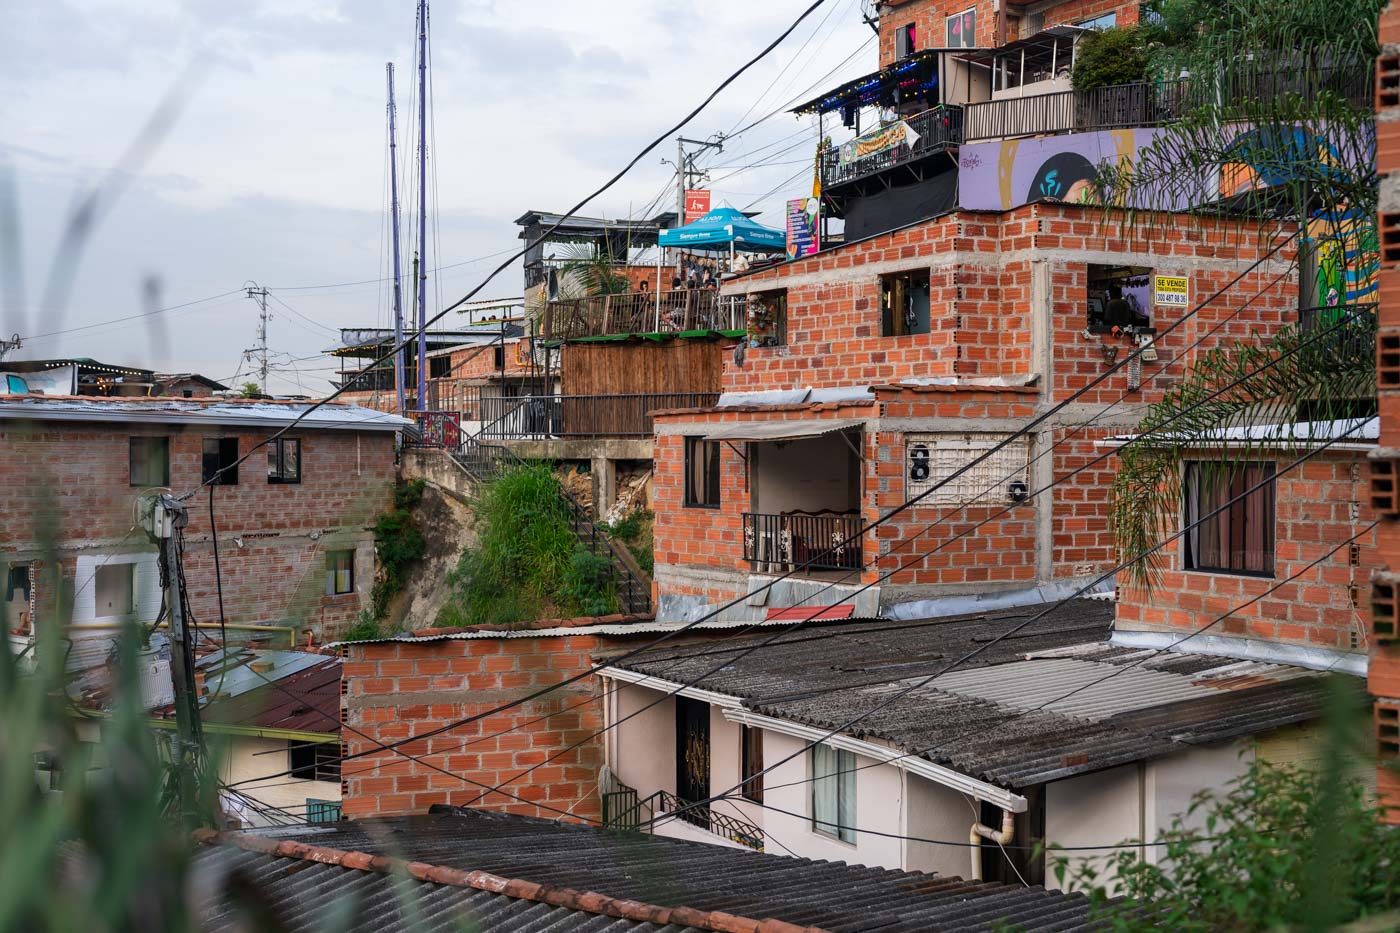 A close-up of the brick and cement houses in Comuna 13.